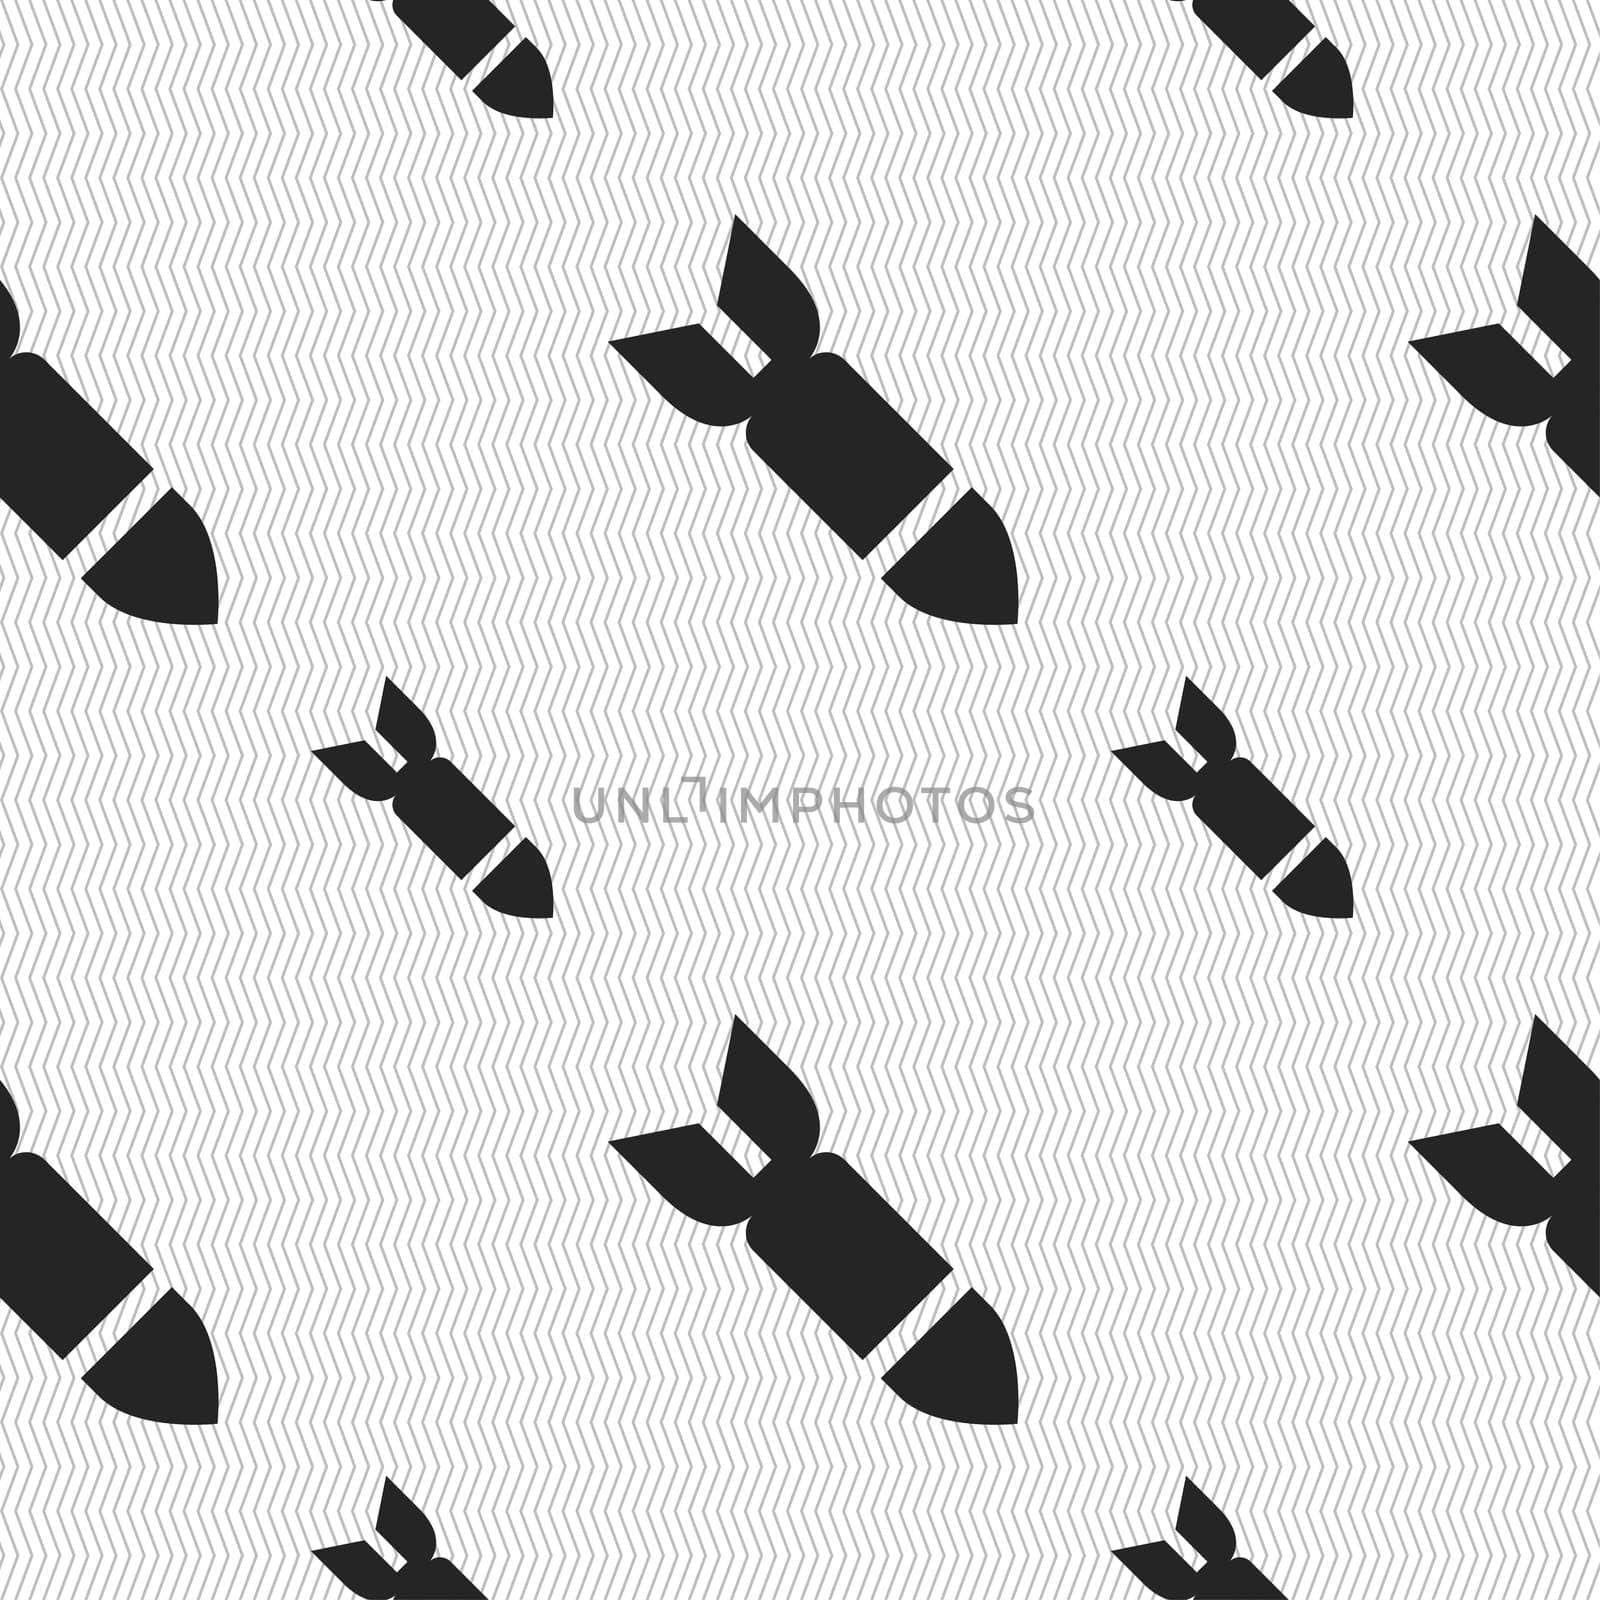 Missile,Rocket weapon icon sign. Seamless pattern with geometric texture. illustration